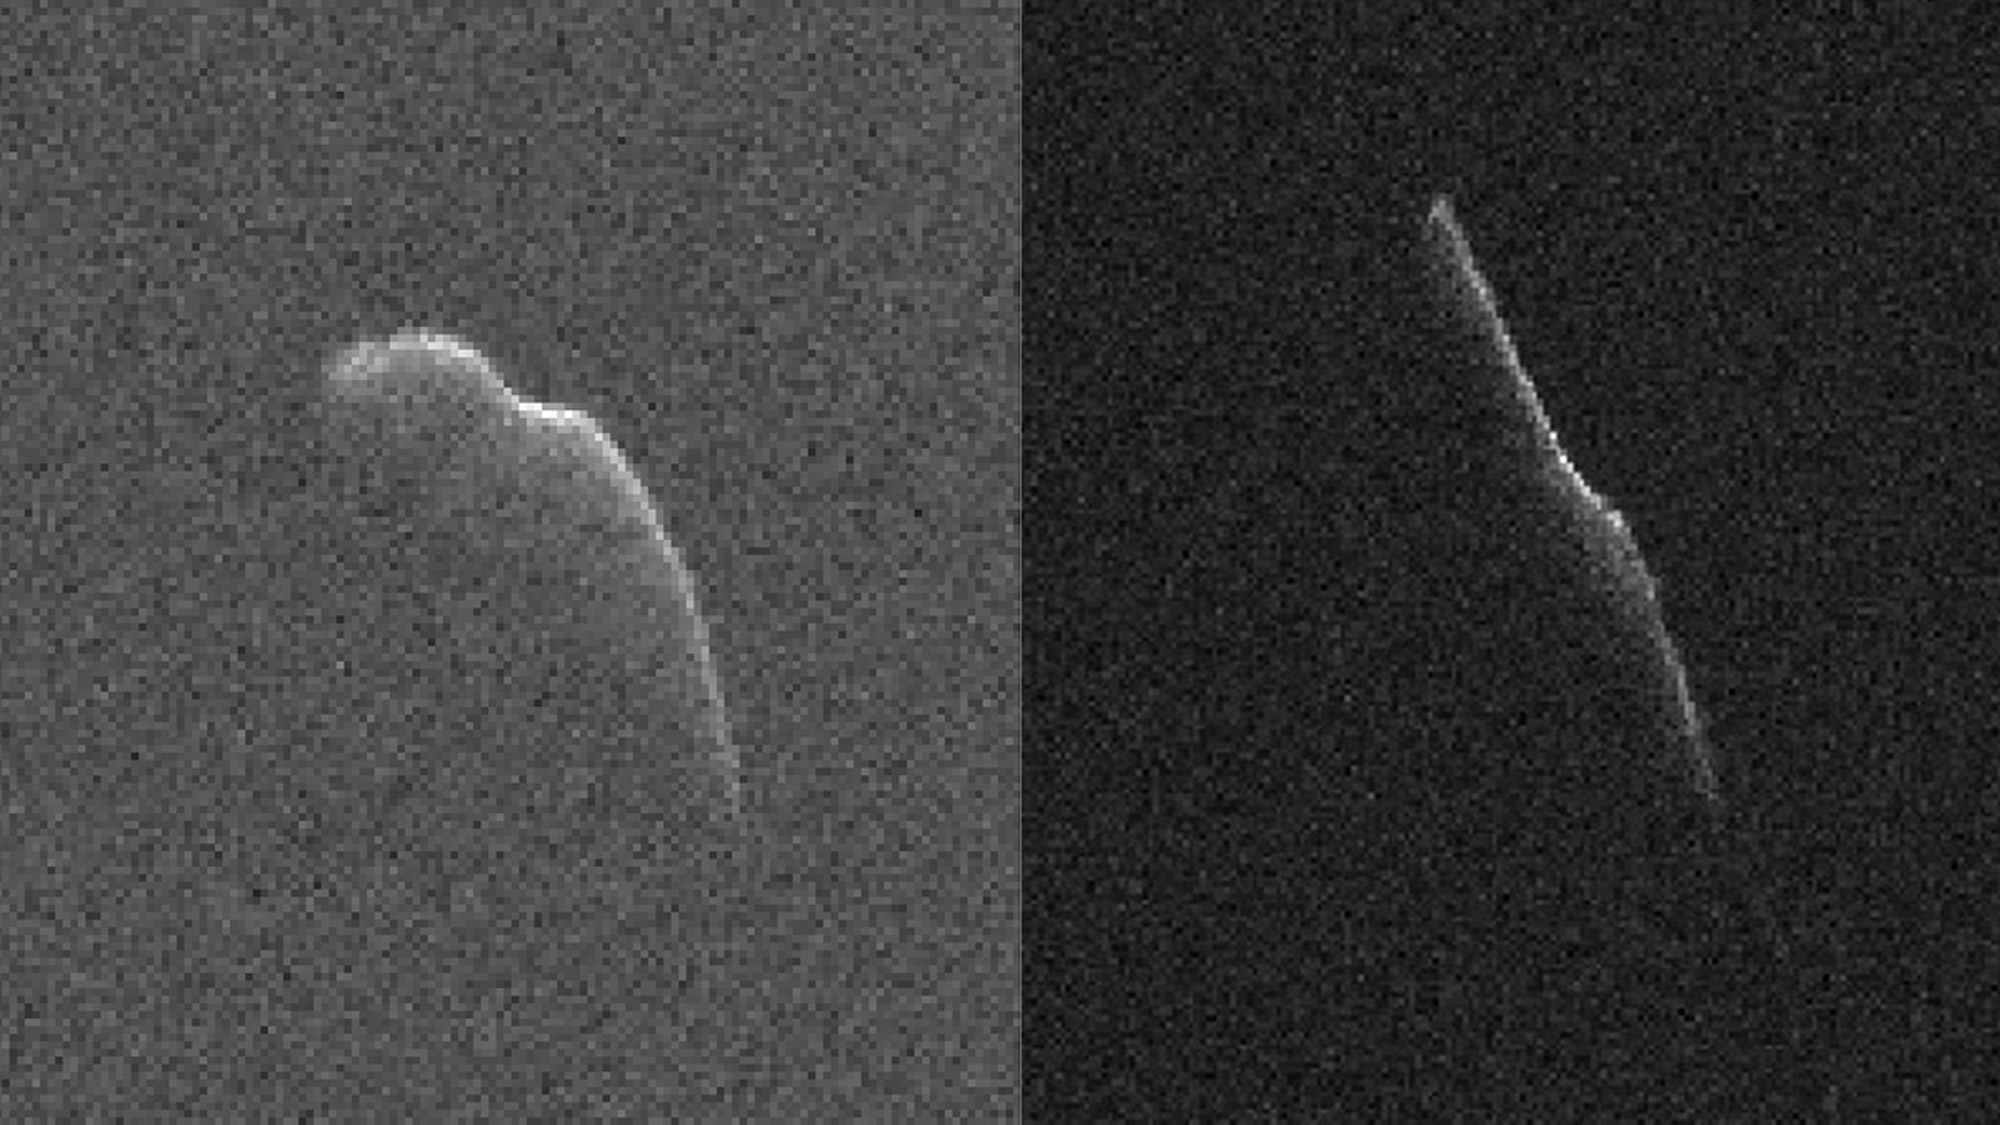 An asteroid will safely fly past Earth at a distance of 6.8 million miles on Dec. 24. (NASA/JPL-Caltech/GSSR)